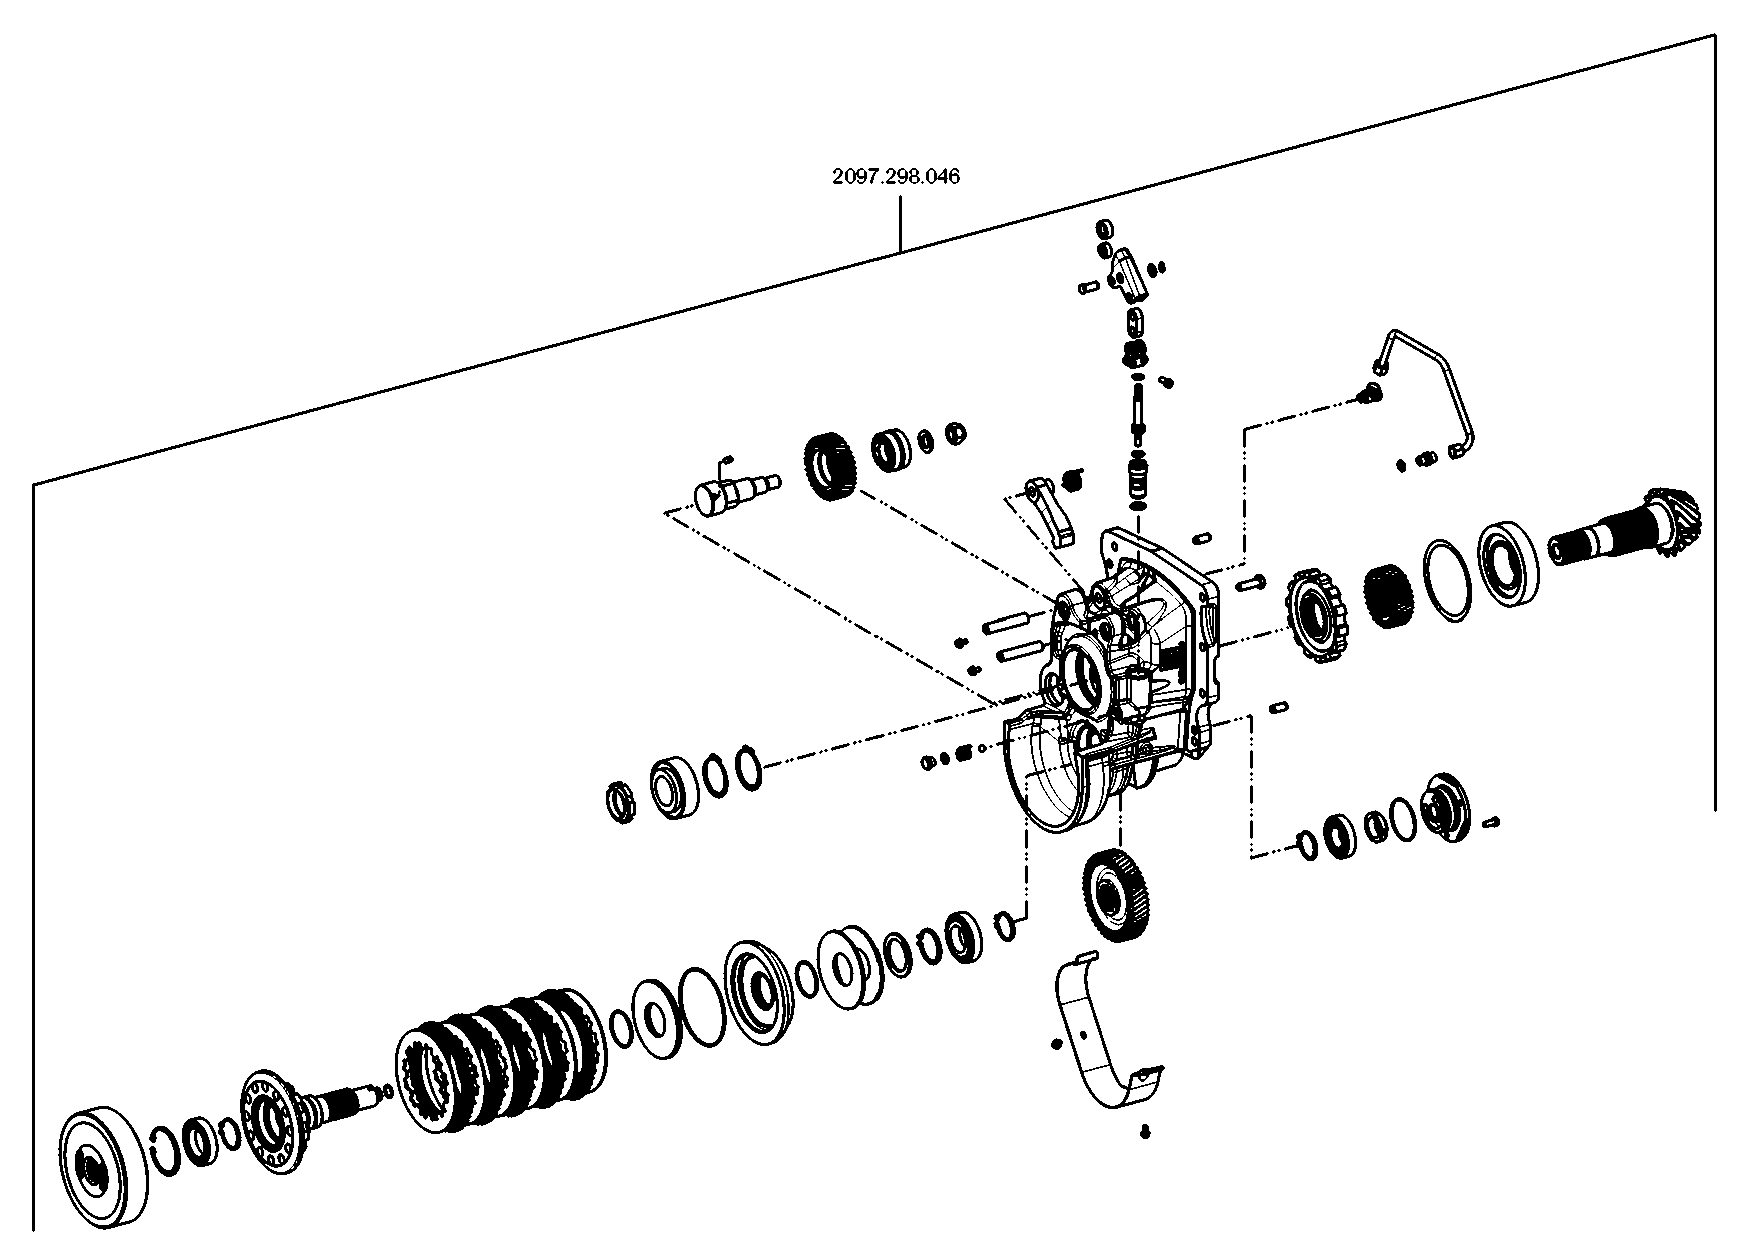 drawing for CNH NEW HOLLAND 0.900.1229.8 - LEG SPRING (figure 3)